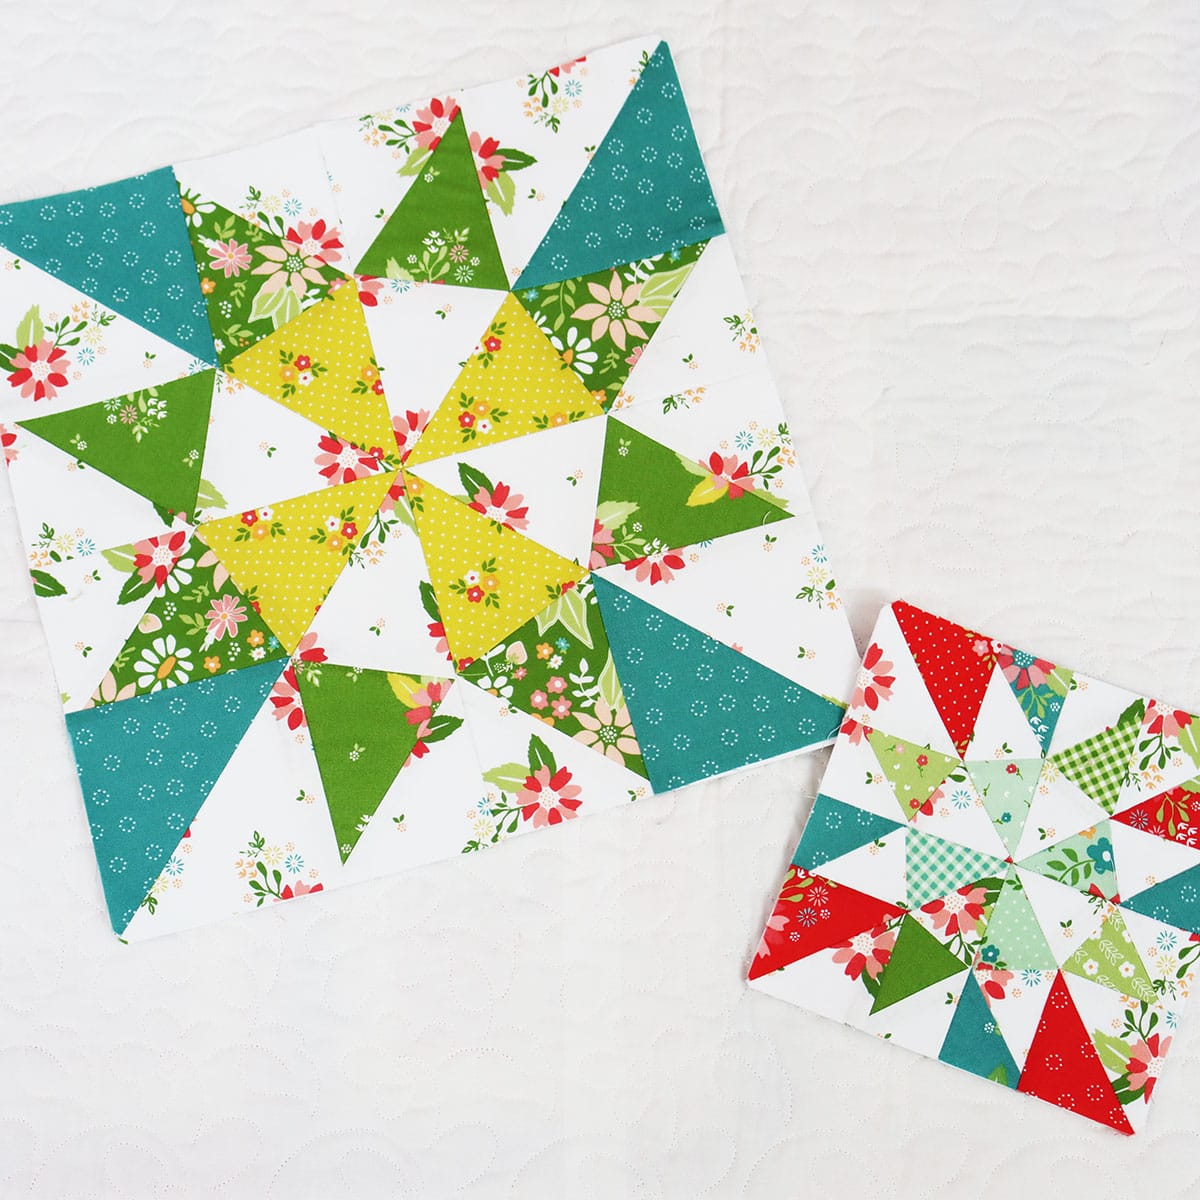 scrappy quilt blocks in bright colors of teal, aqua, green, citrine, and red.